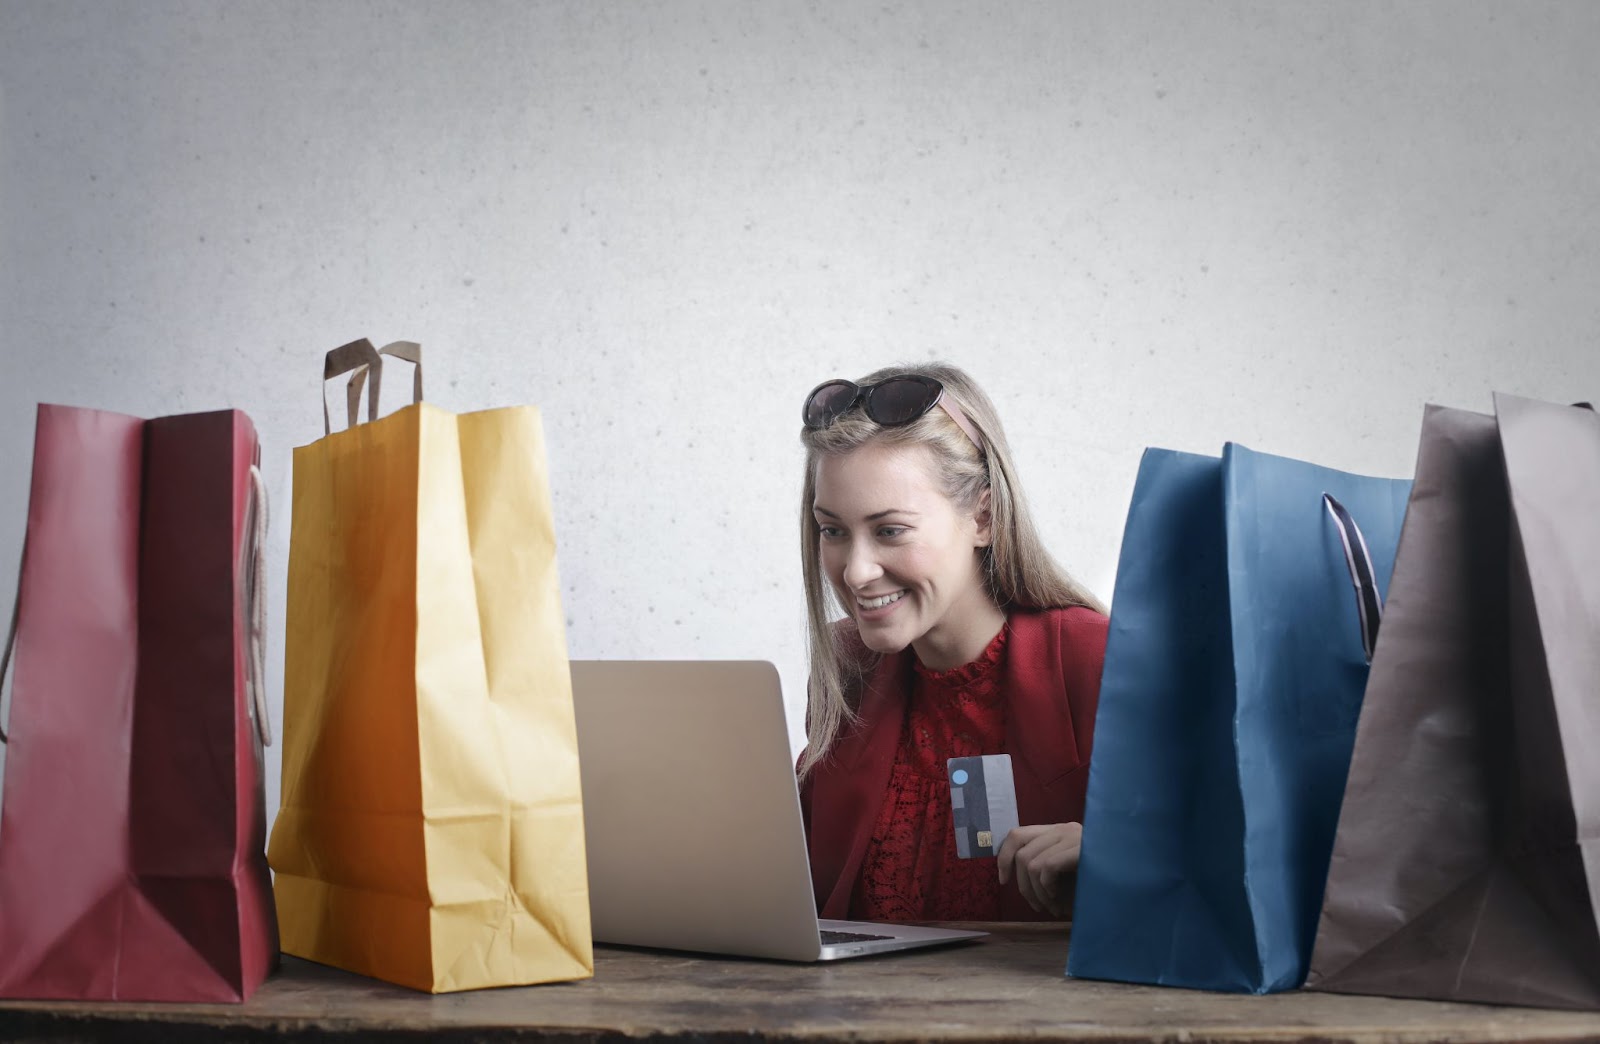 Loyalty Programs will increase the Average Order Value (AOV) by encouraging repeat purchases